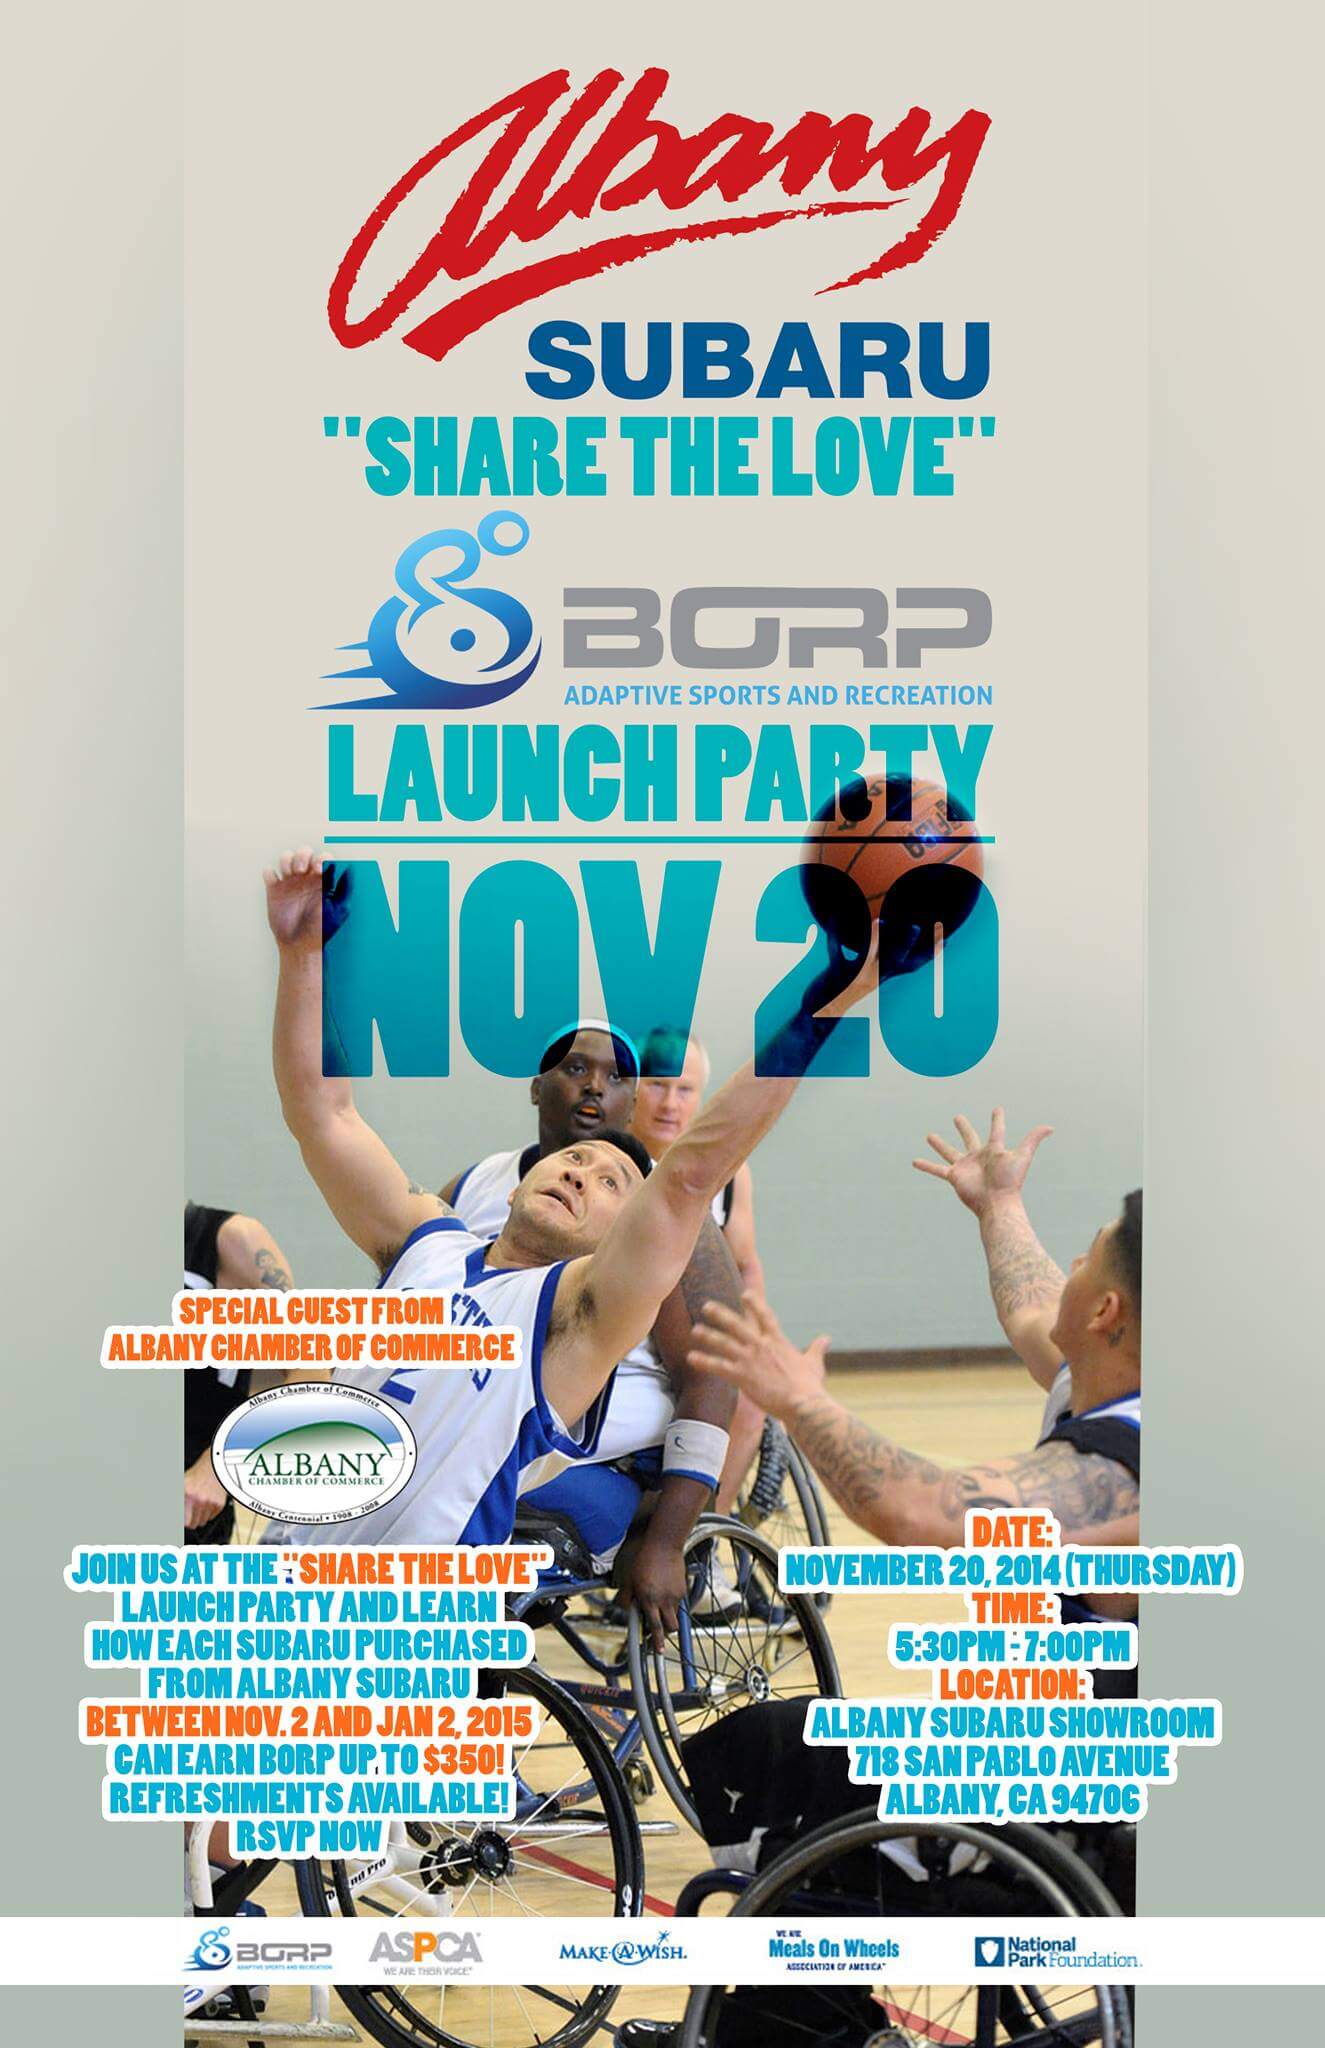 The "Share the Love" Albany Subaru Launch Party is Nov. 20.   